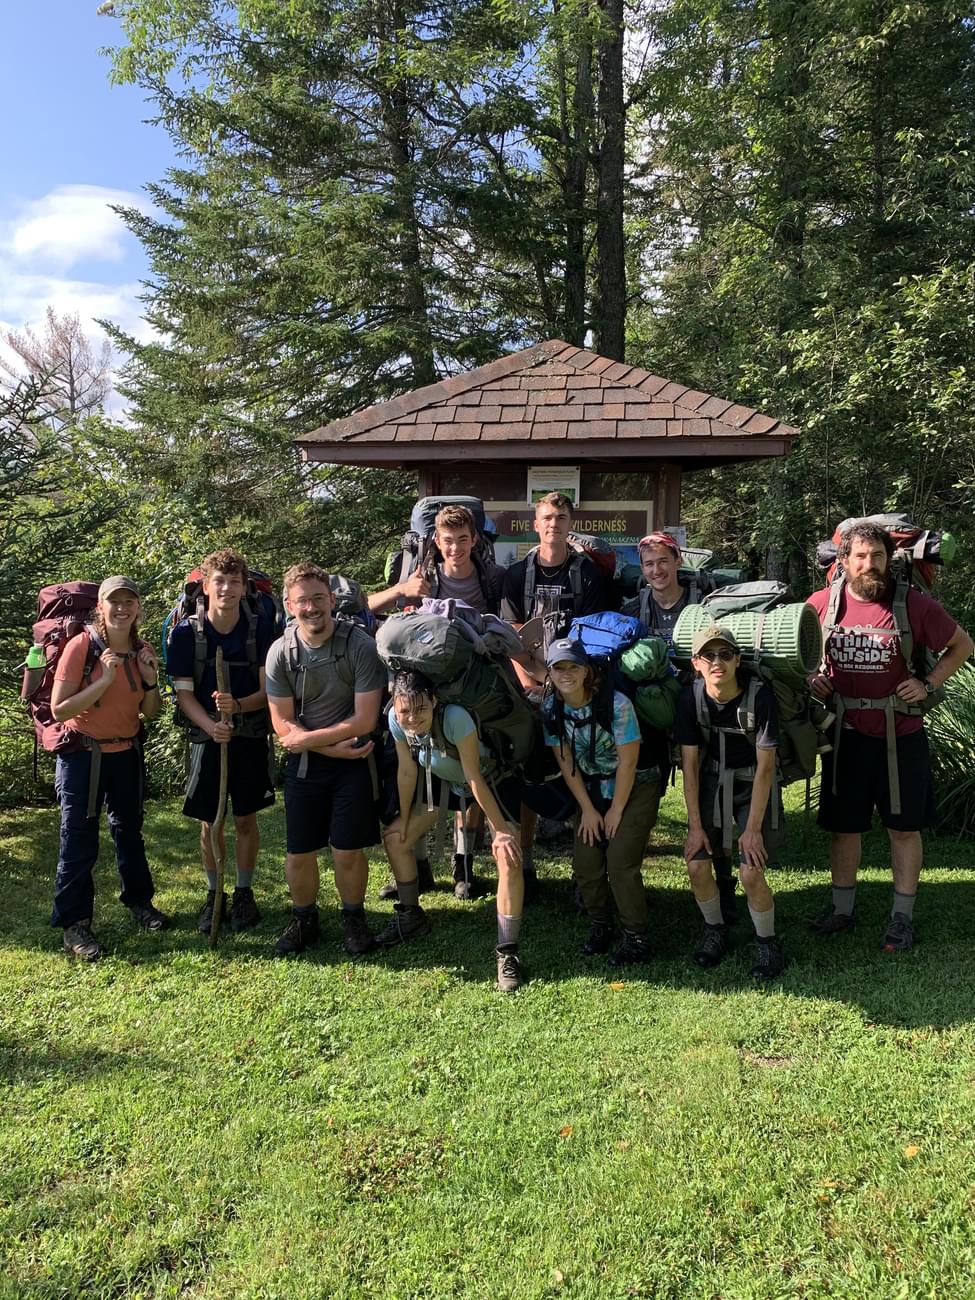 Houghton students standing together with backpack gear during Highlander Wilderness Adventure.